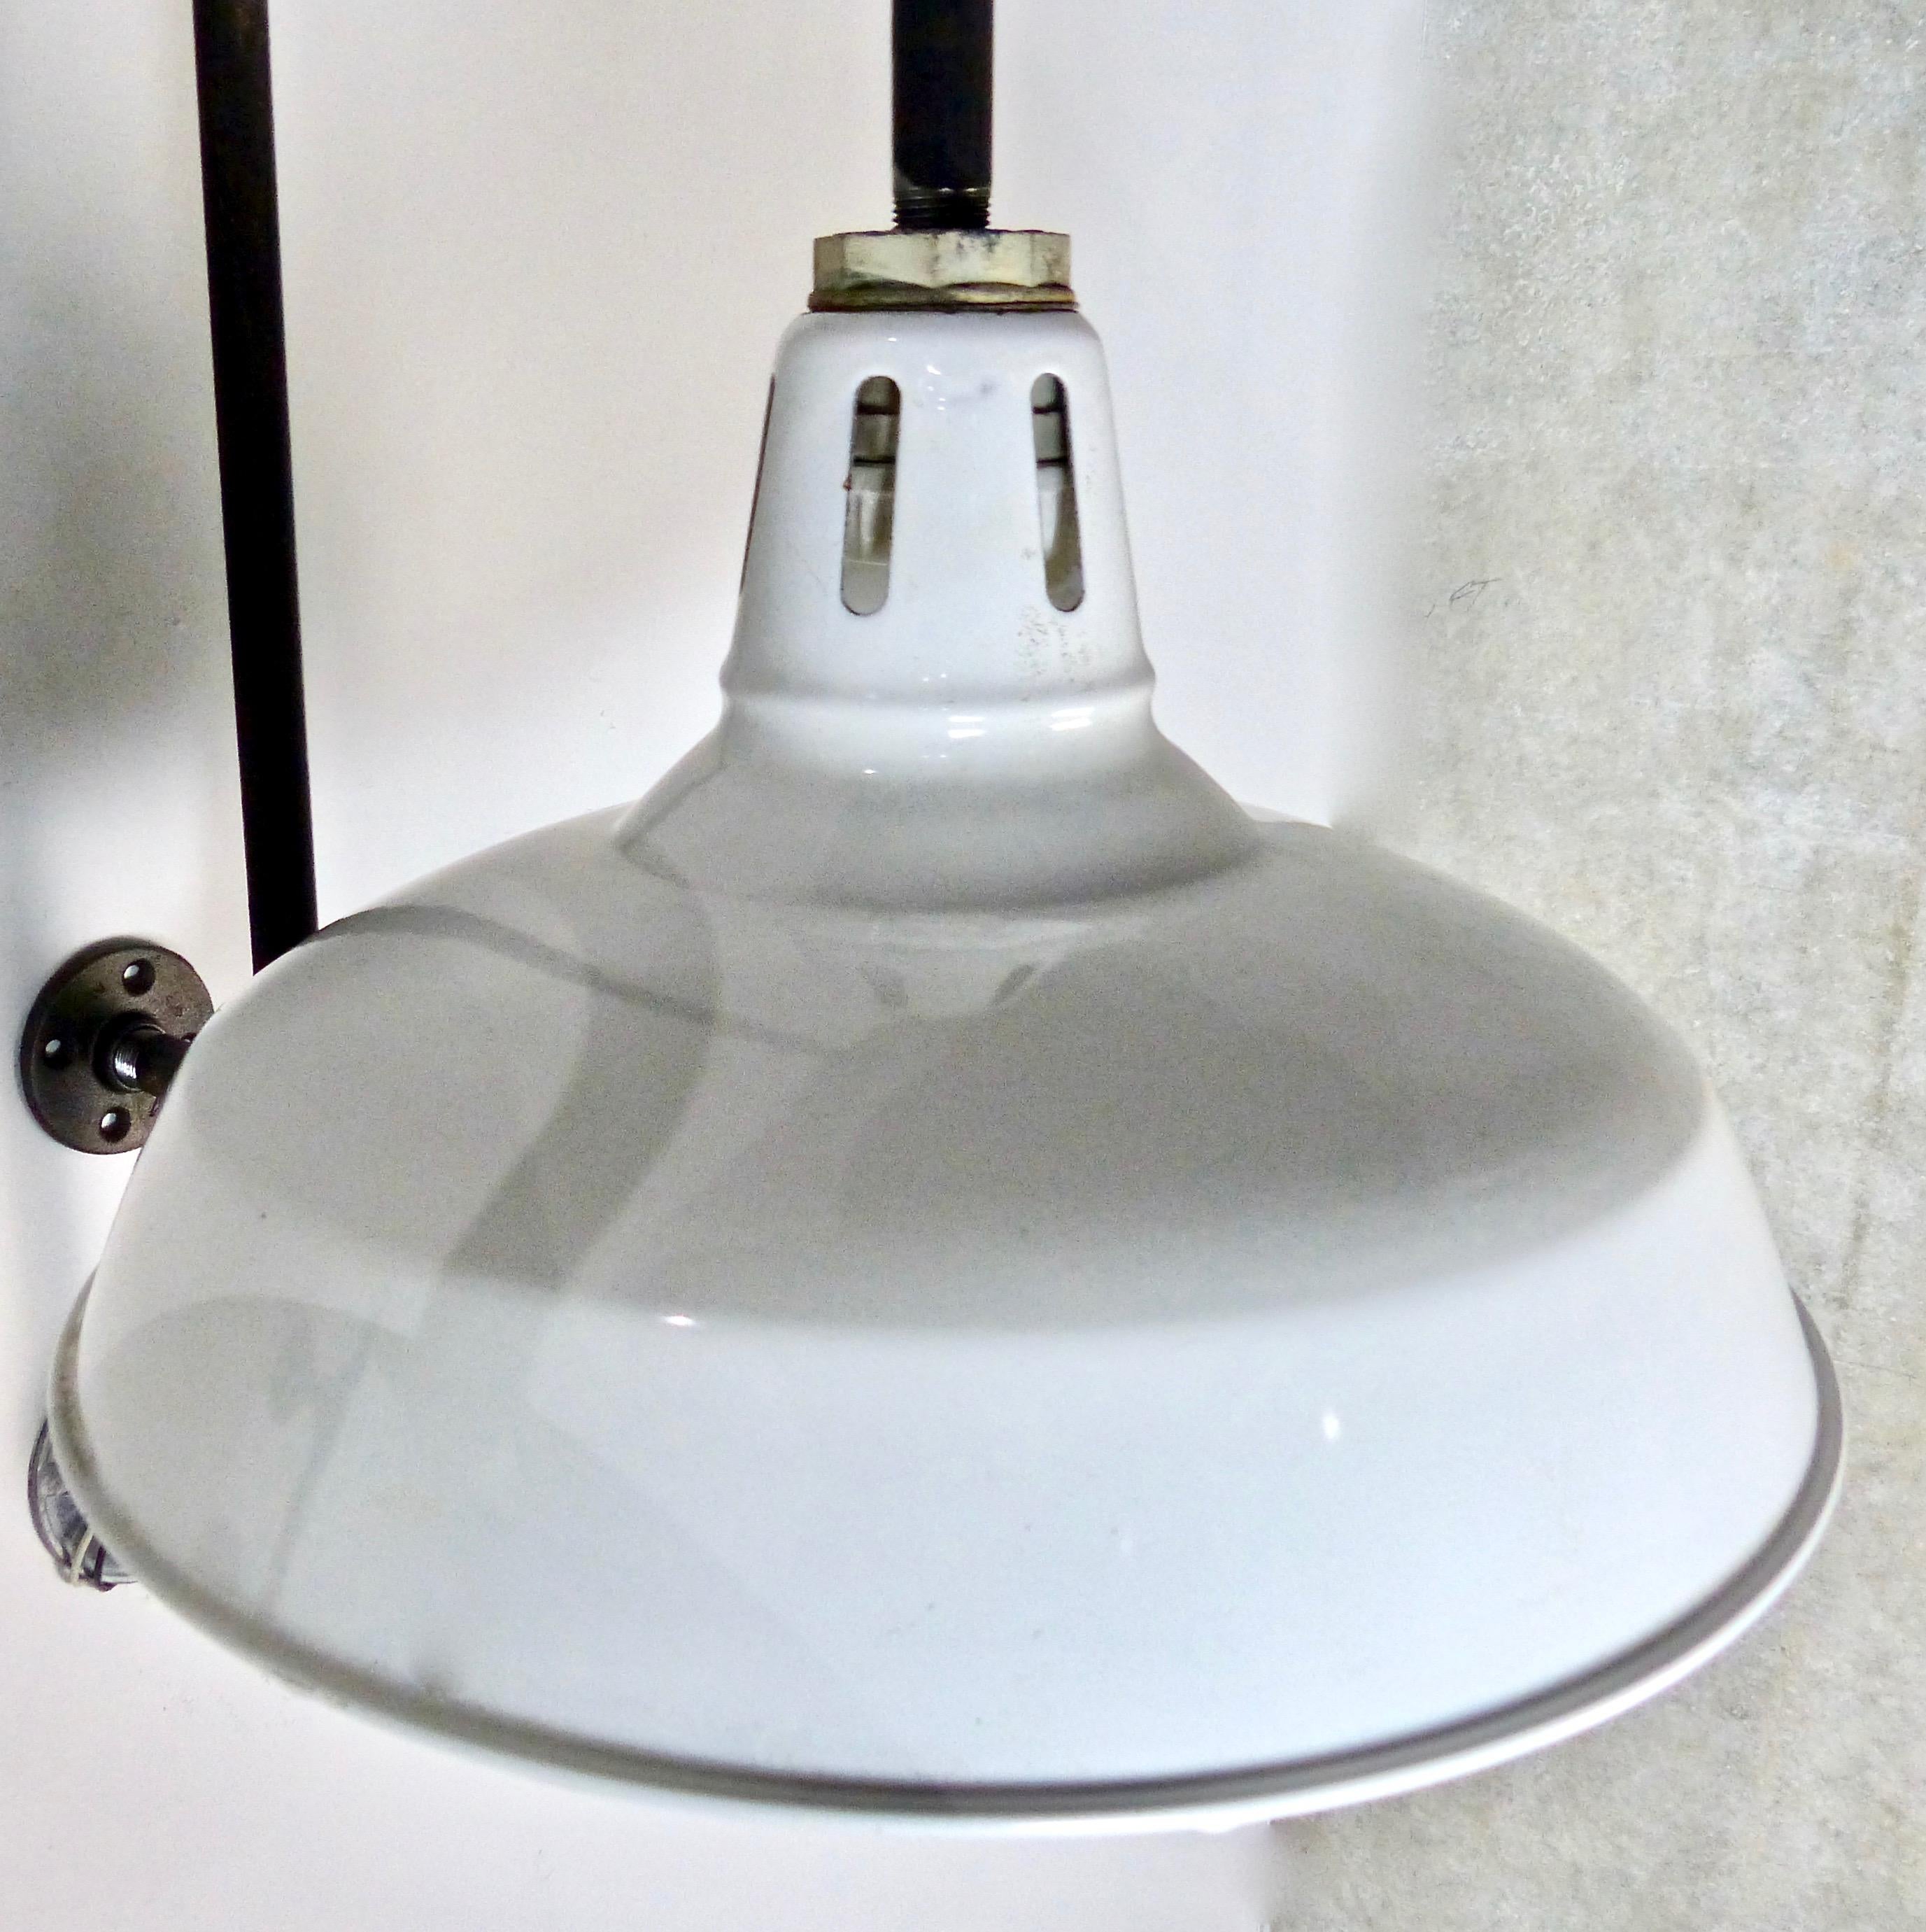 Vintage matched pair of Industrial wall-mounted sconces, circa 1940. Nice details on their original enamel shades. Re-wired and CSA approved to current electrical standards. Great look for your loft space. Price per light.
Dimensions: 27” H x 16” W